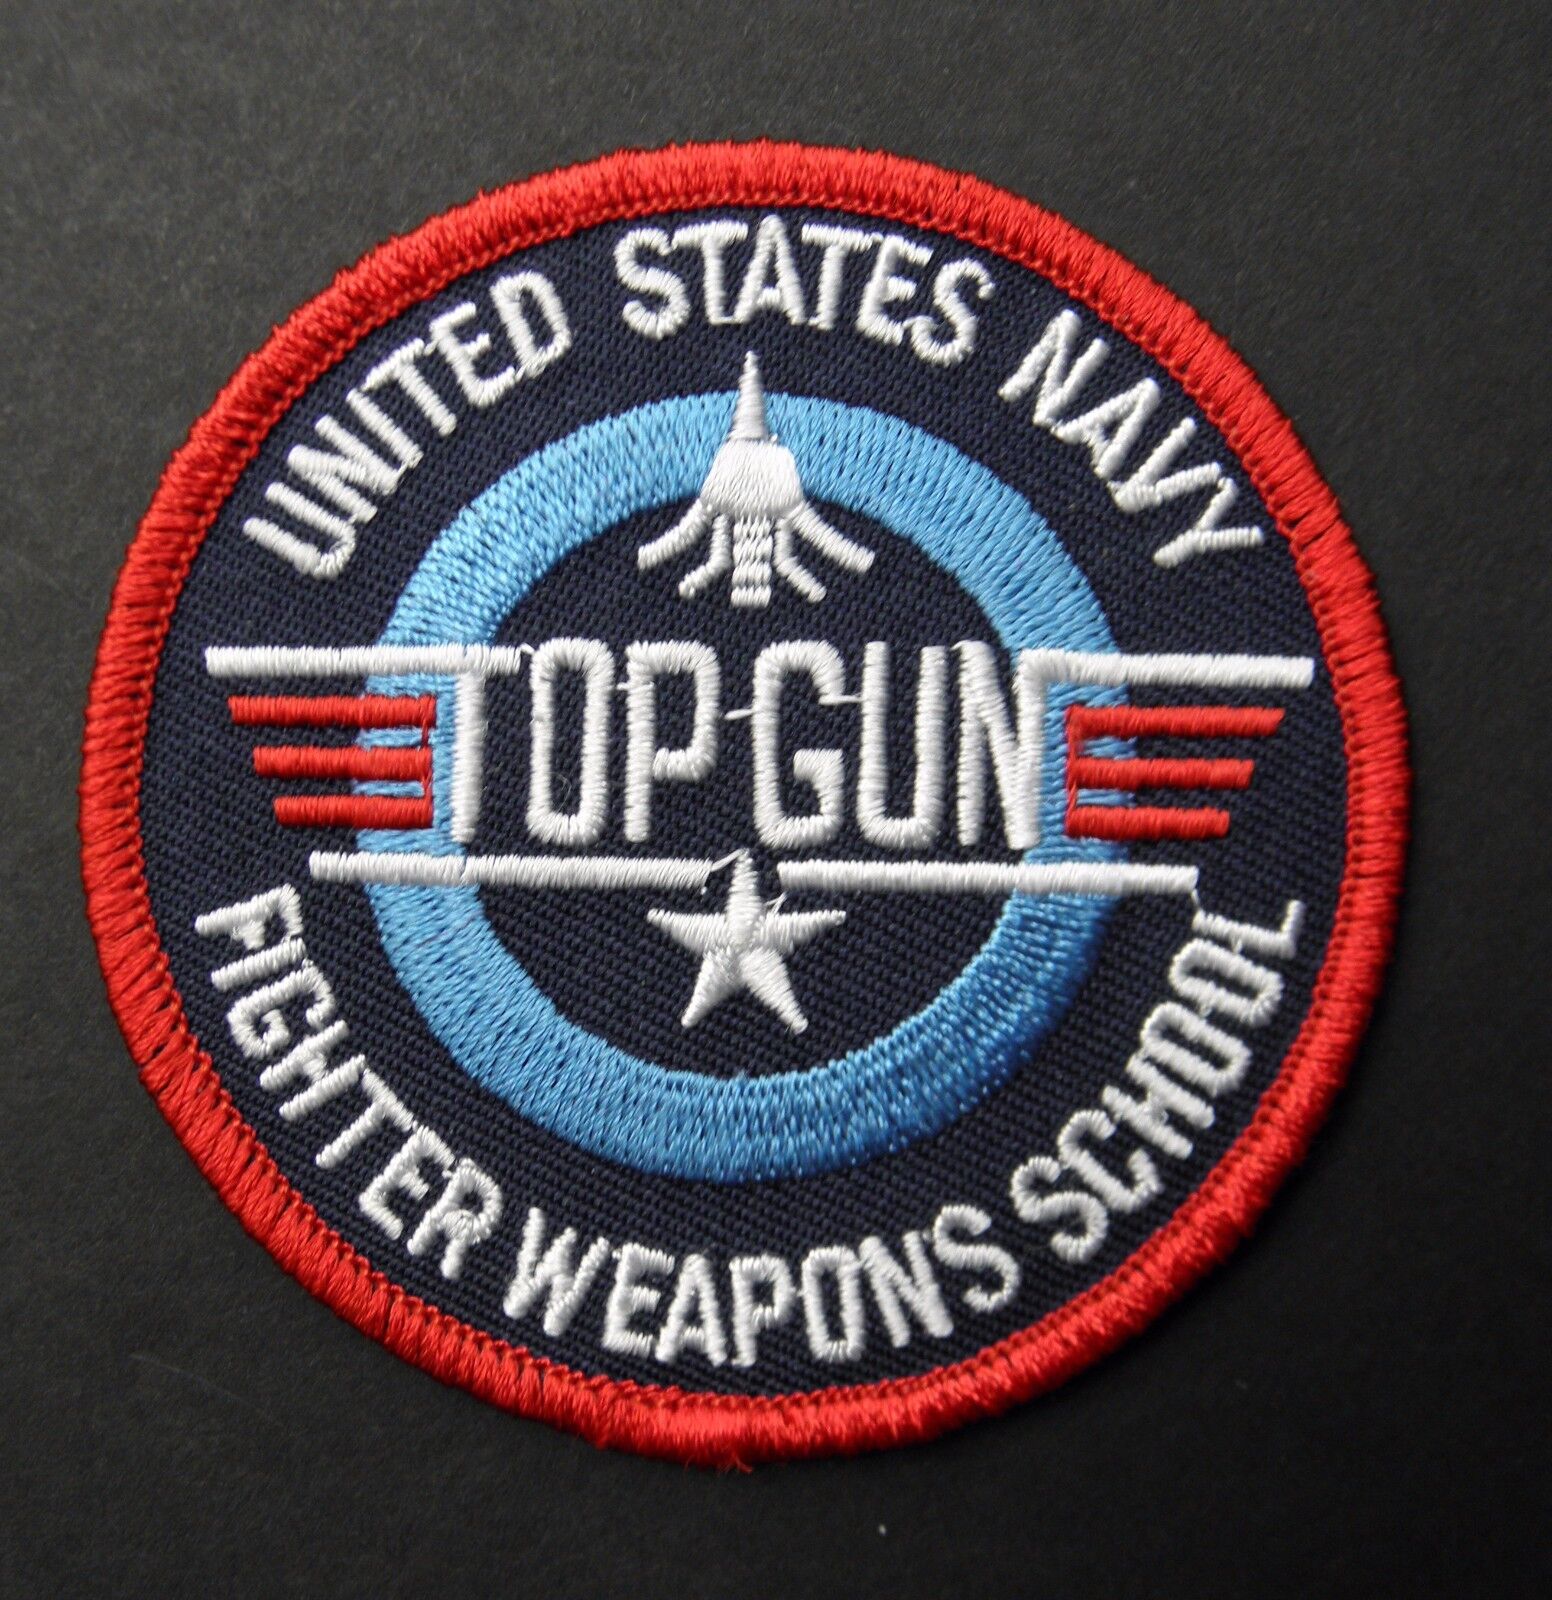 TOP GUN US NAVY WEAPONS SCHOOL EMBROIDERED PATCH 3.1 inches TOM CRUISE MAVERICK